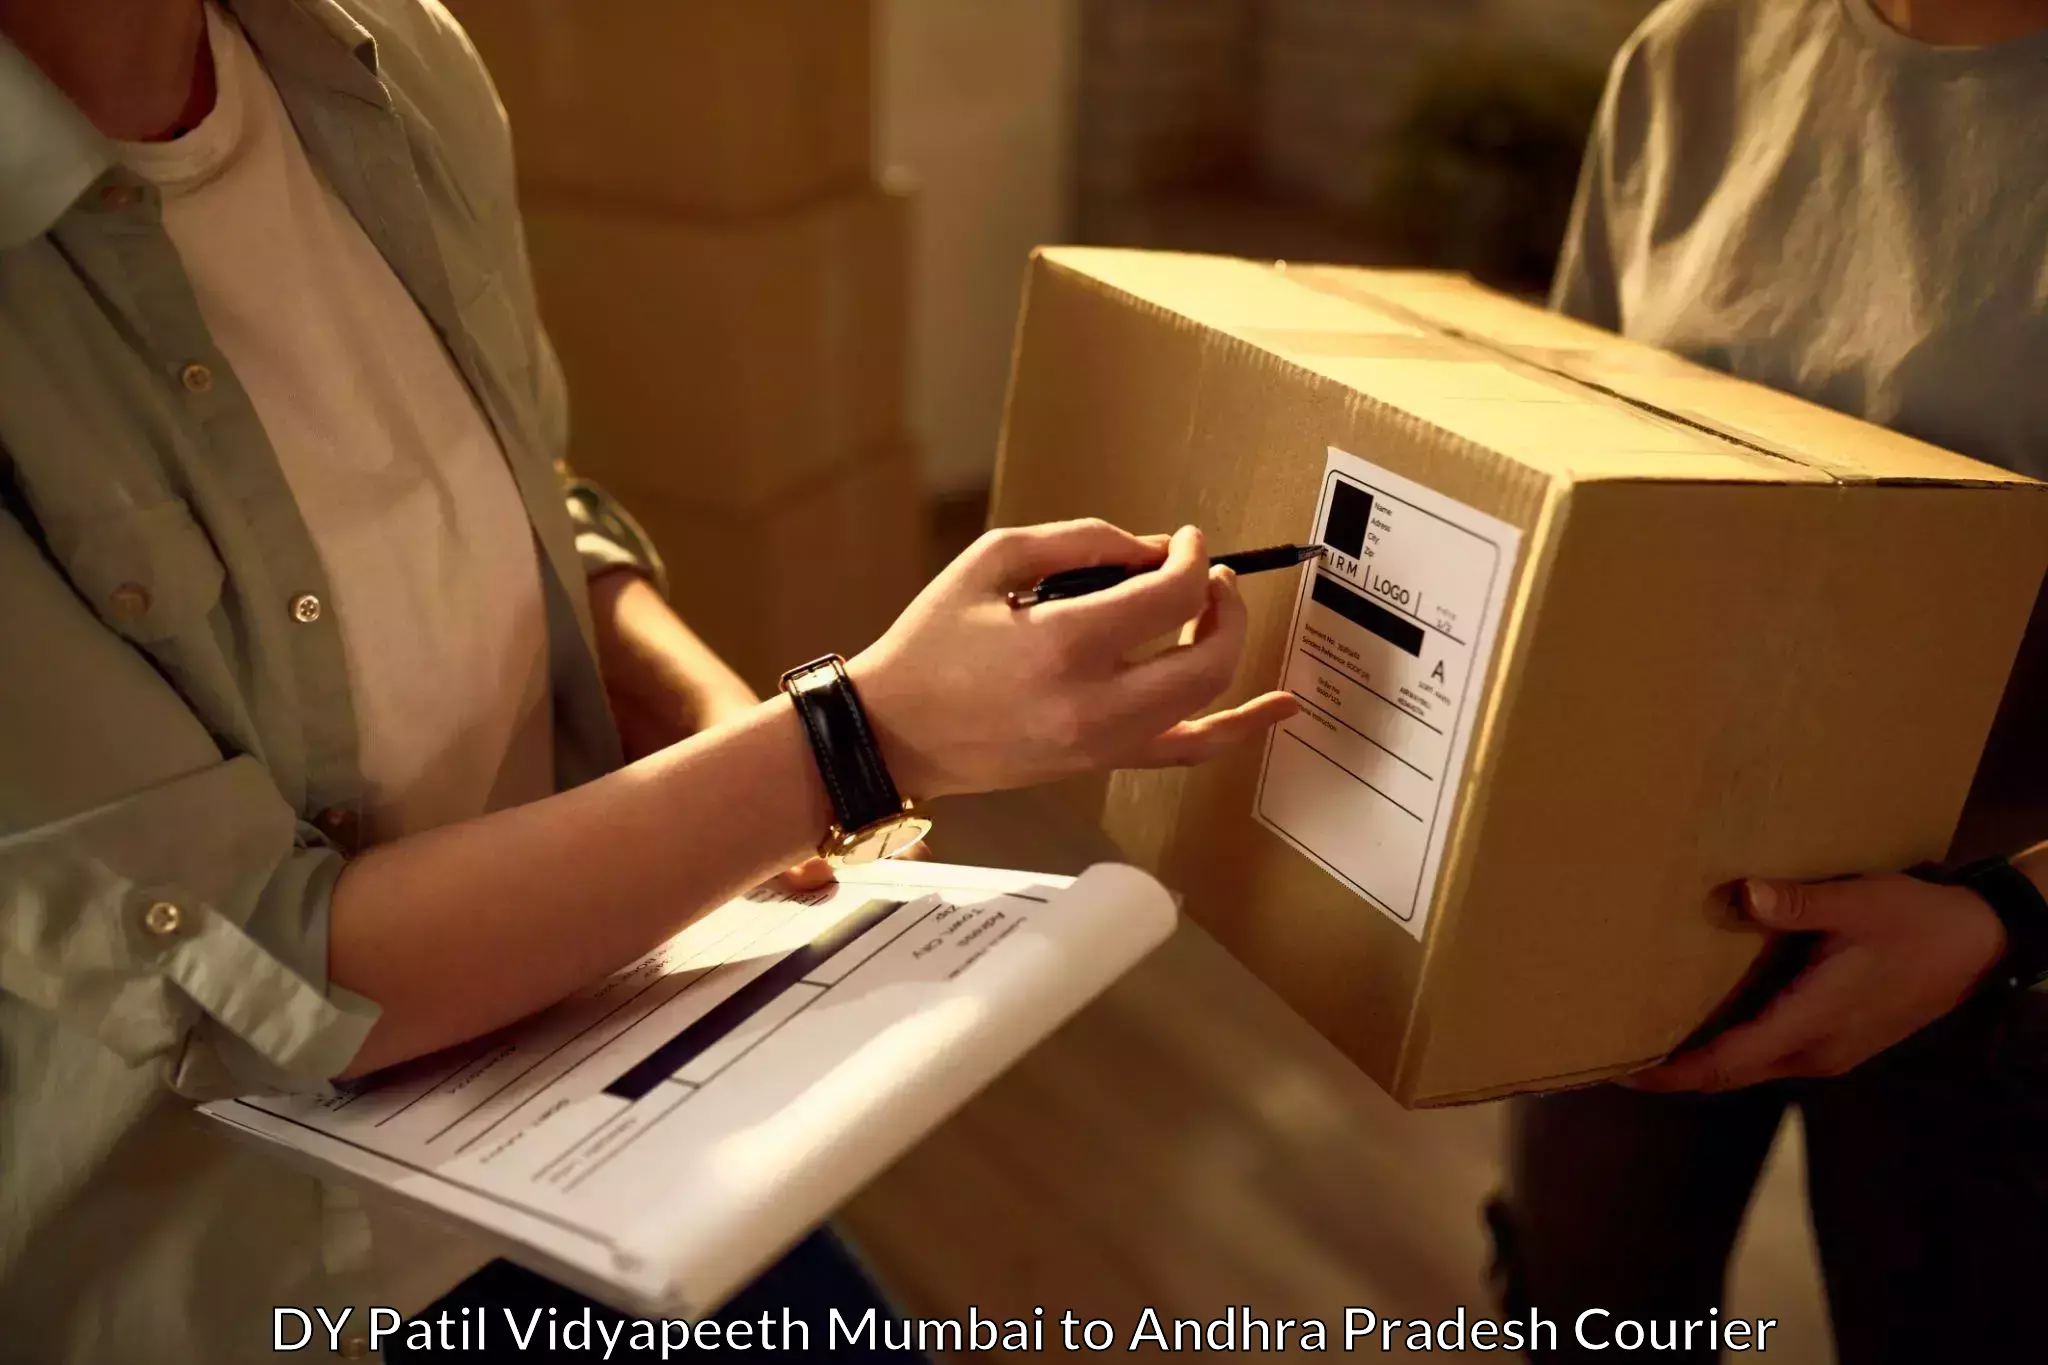 Custom courier packages DY Patil Vidyapeeth Mumbai to Giddalur